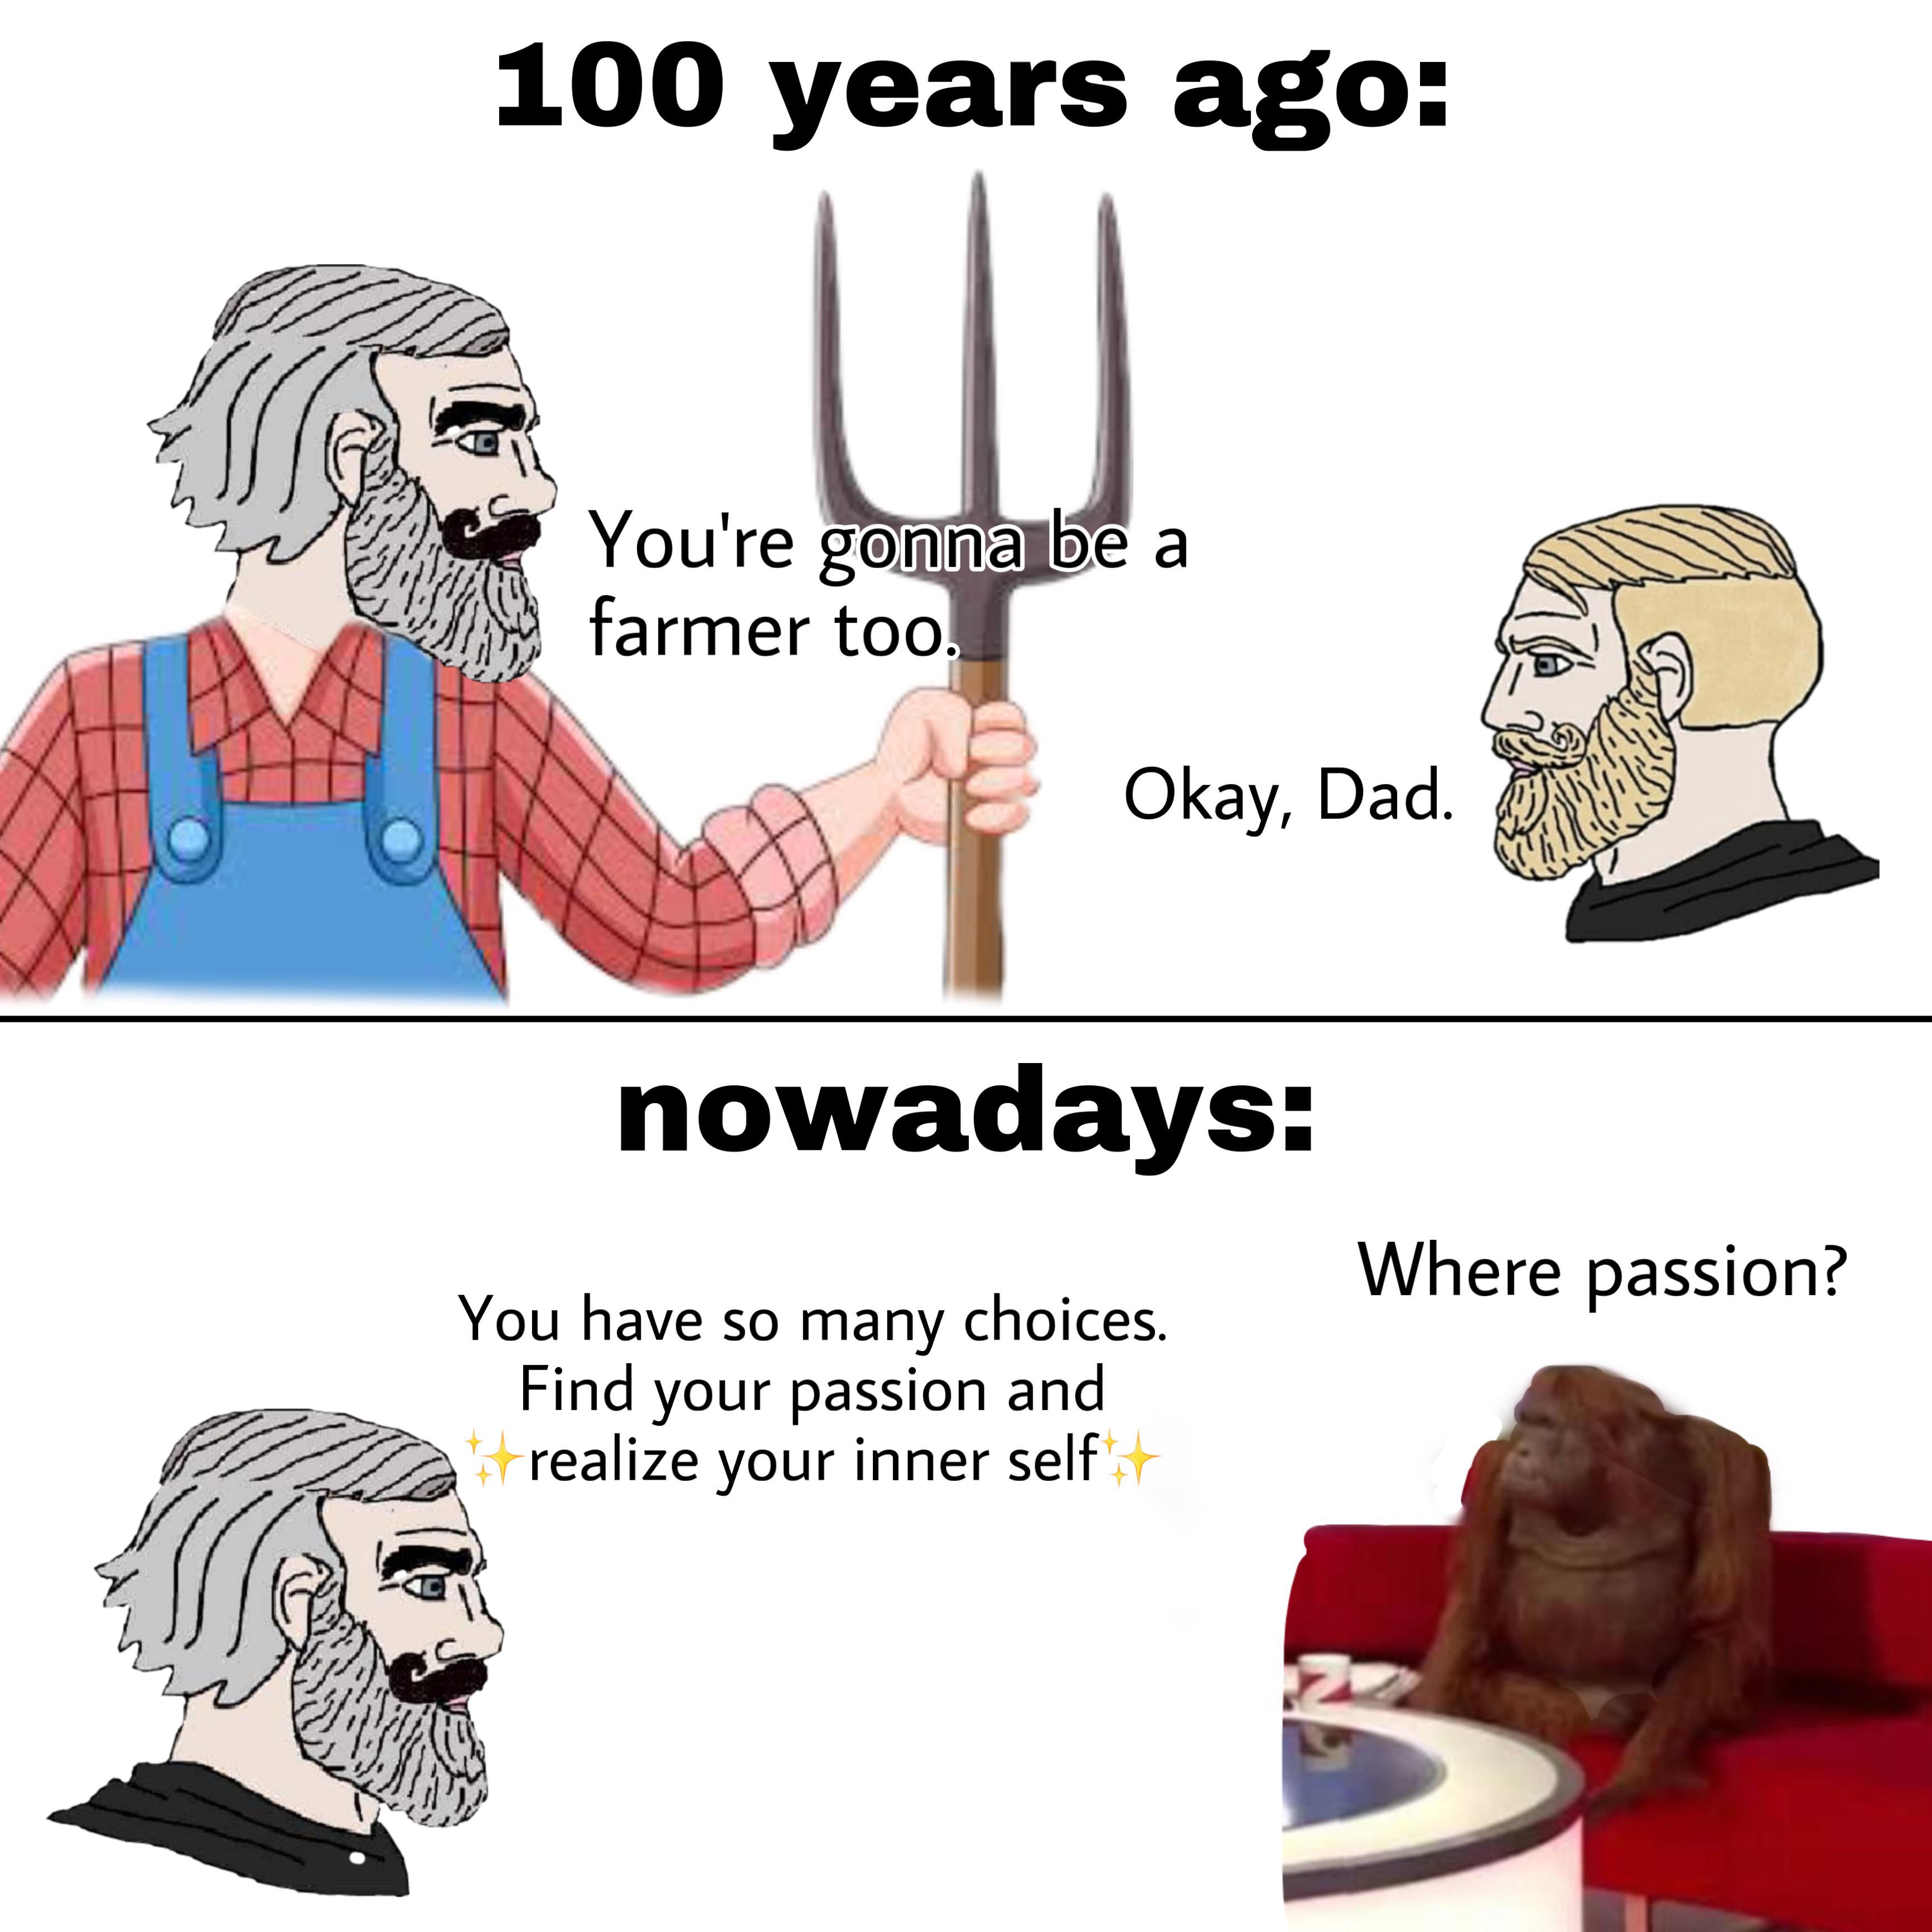 funny and dank memes  - cartoon - 100 years ago You're gonna be a farmer too Okay, Dad. nowadays Where passion? You have so many choices. Find your passion and realize your inner self